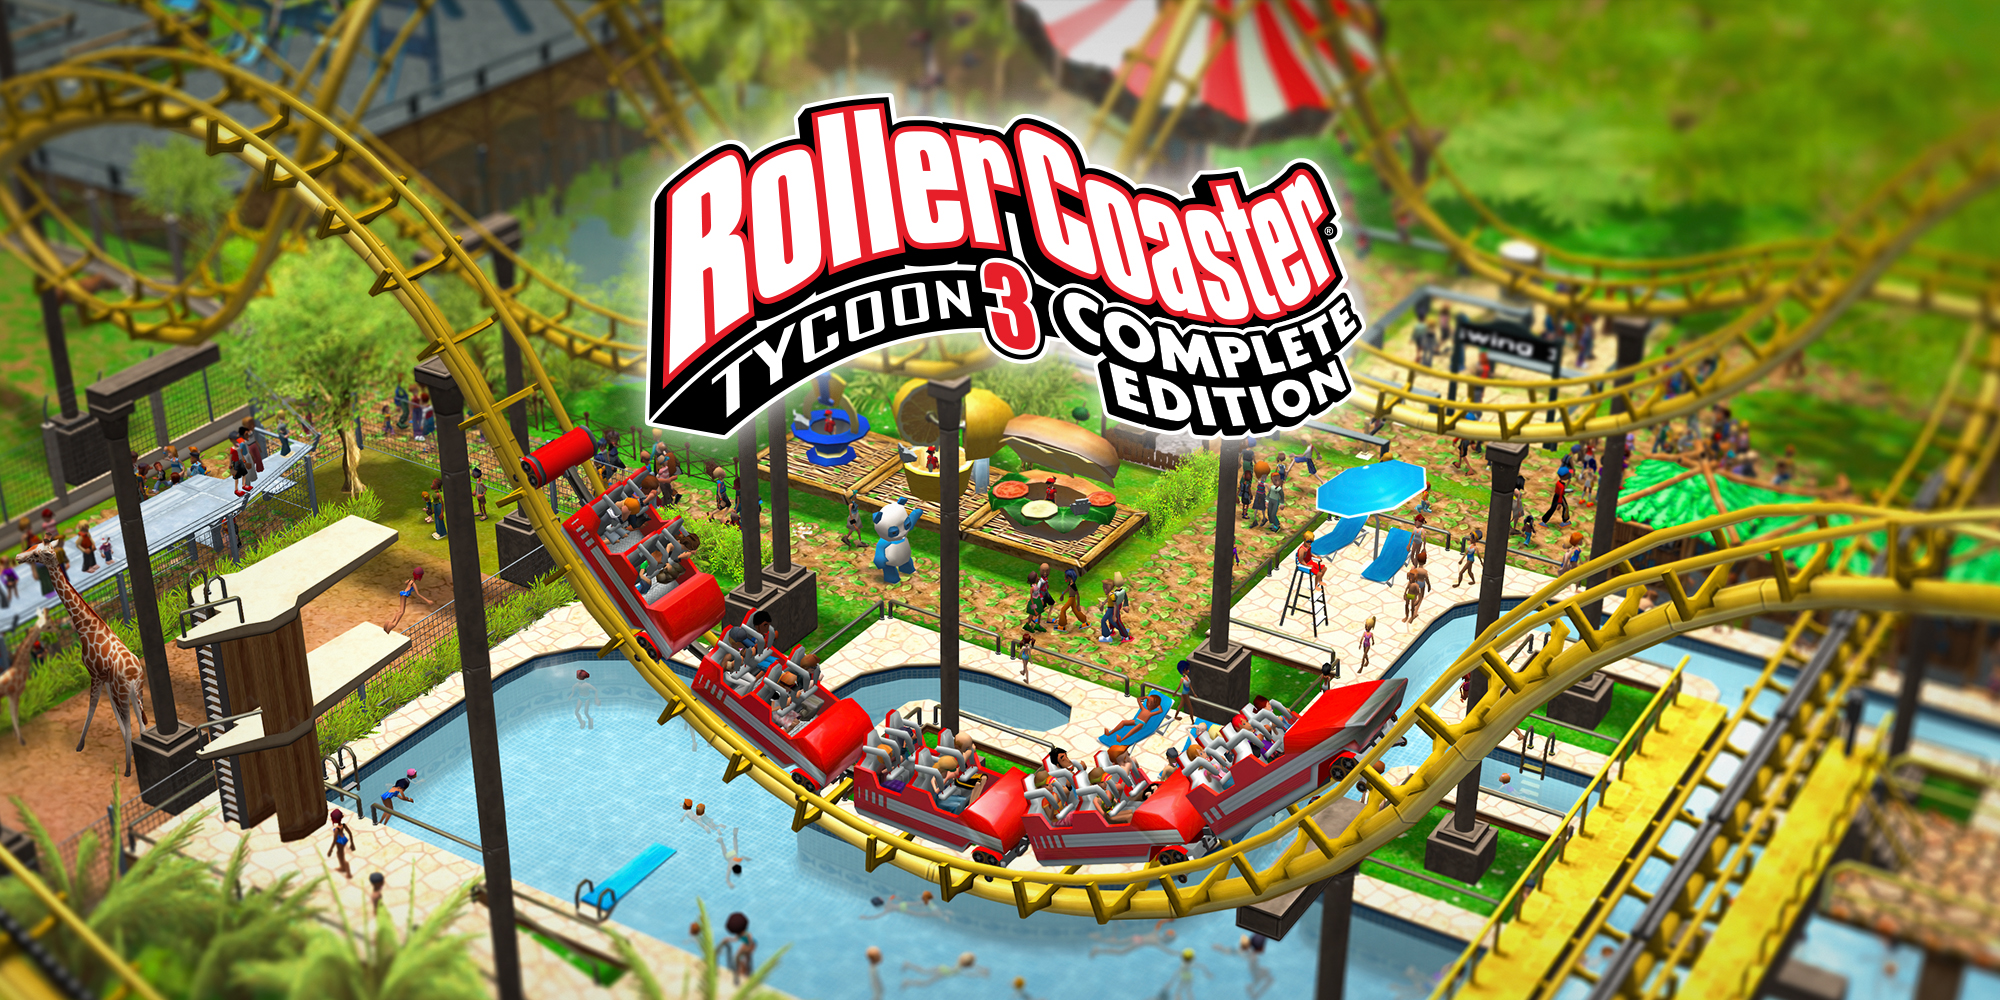 How To Play Rollercoaster Tycoon On Switch - BEST GAMES WALKTHROUGH